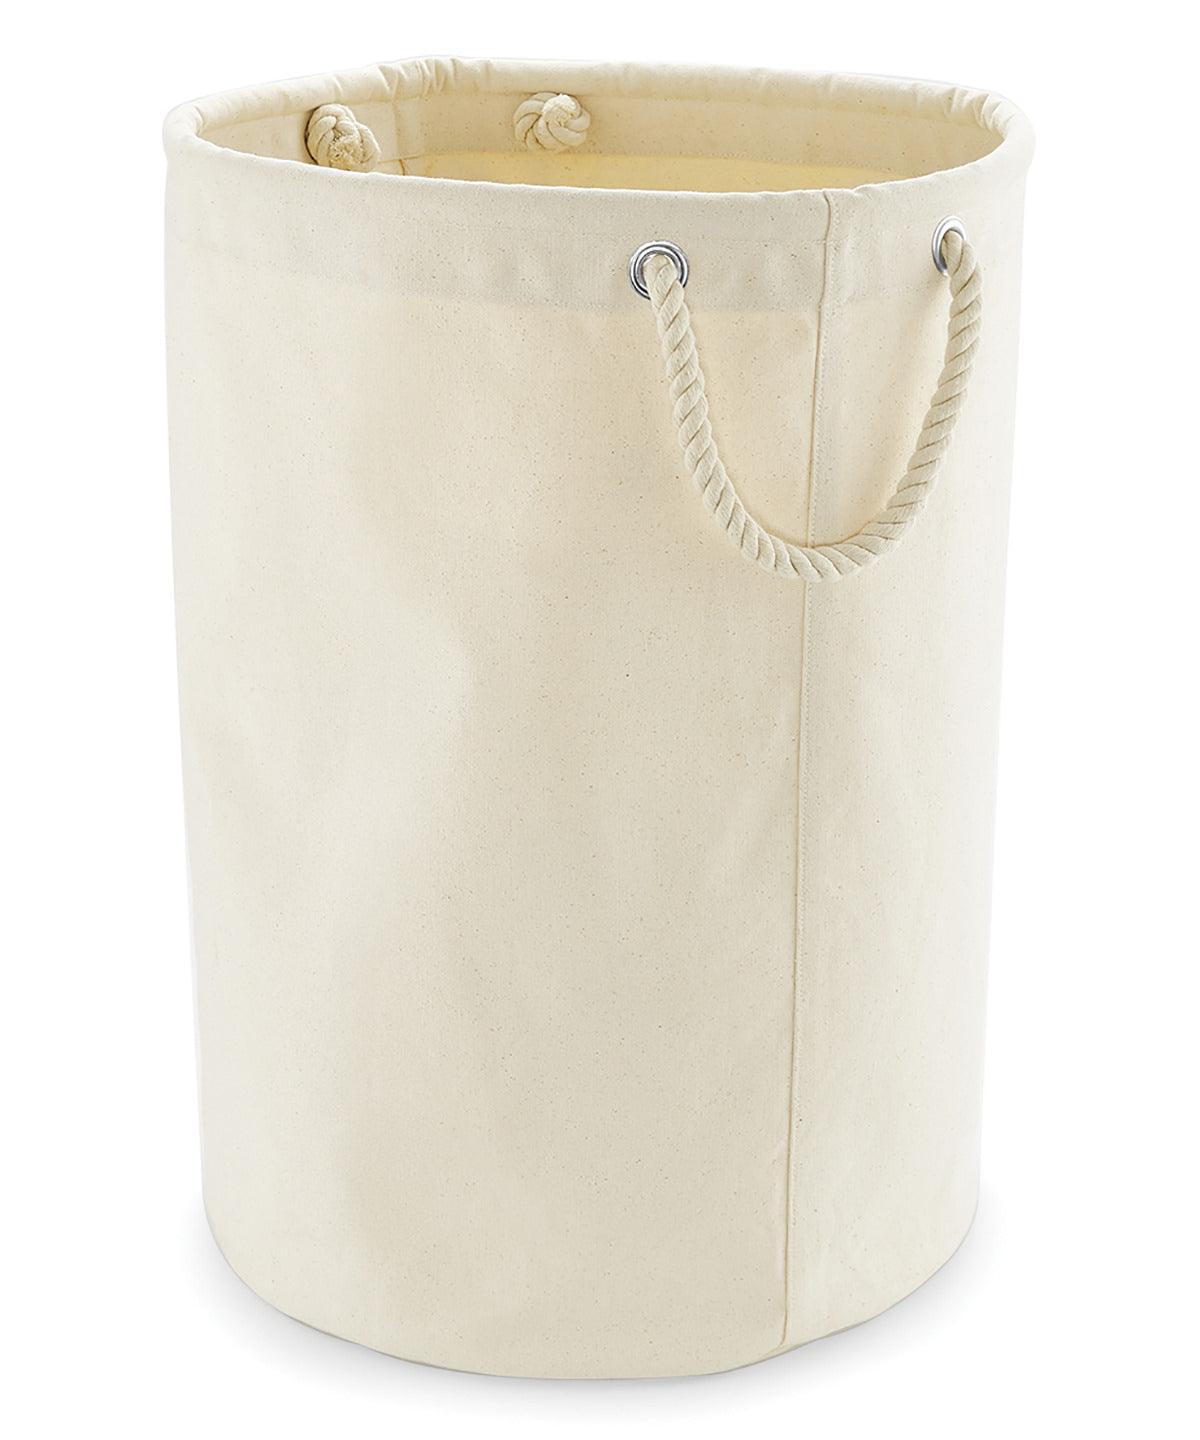 Natural - Heavy canvas storage trug Storage Westford Mill Bags & Luggage, Gifting, Must Haves Schoolwear Centres